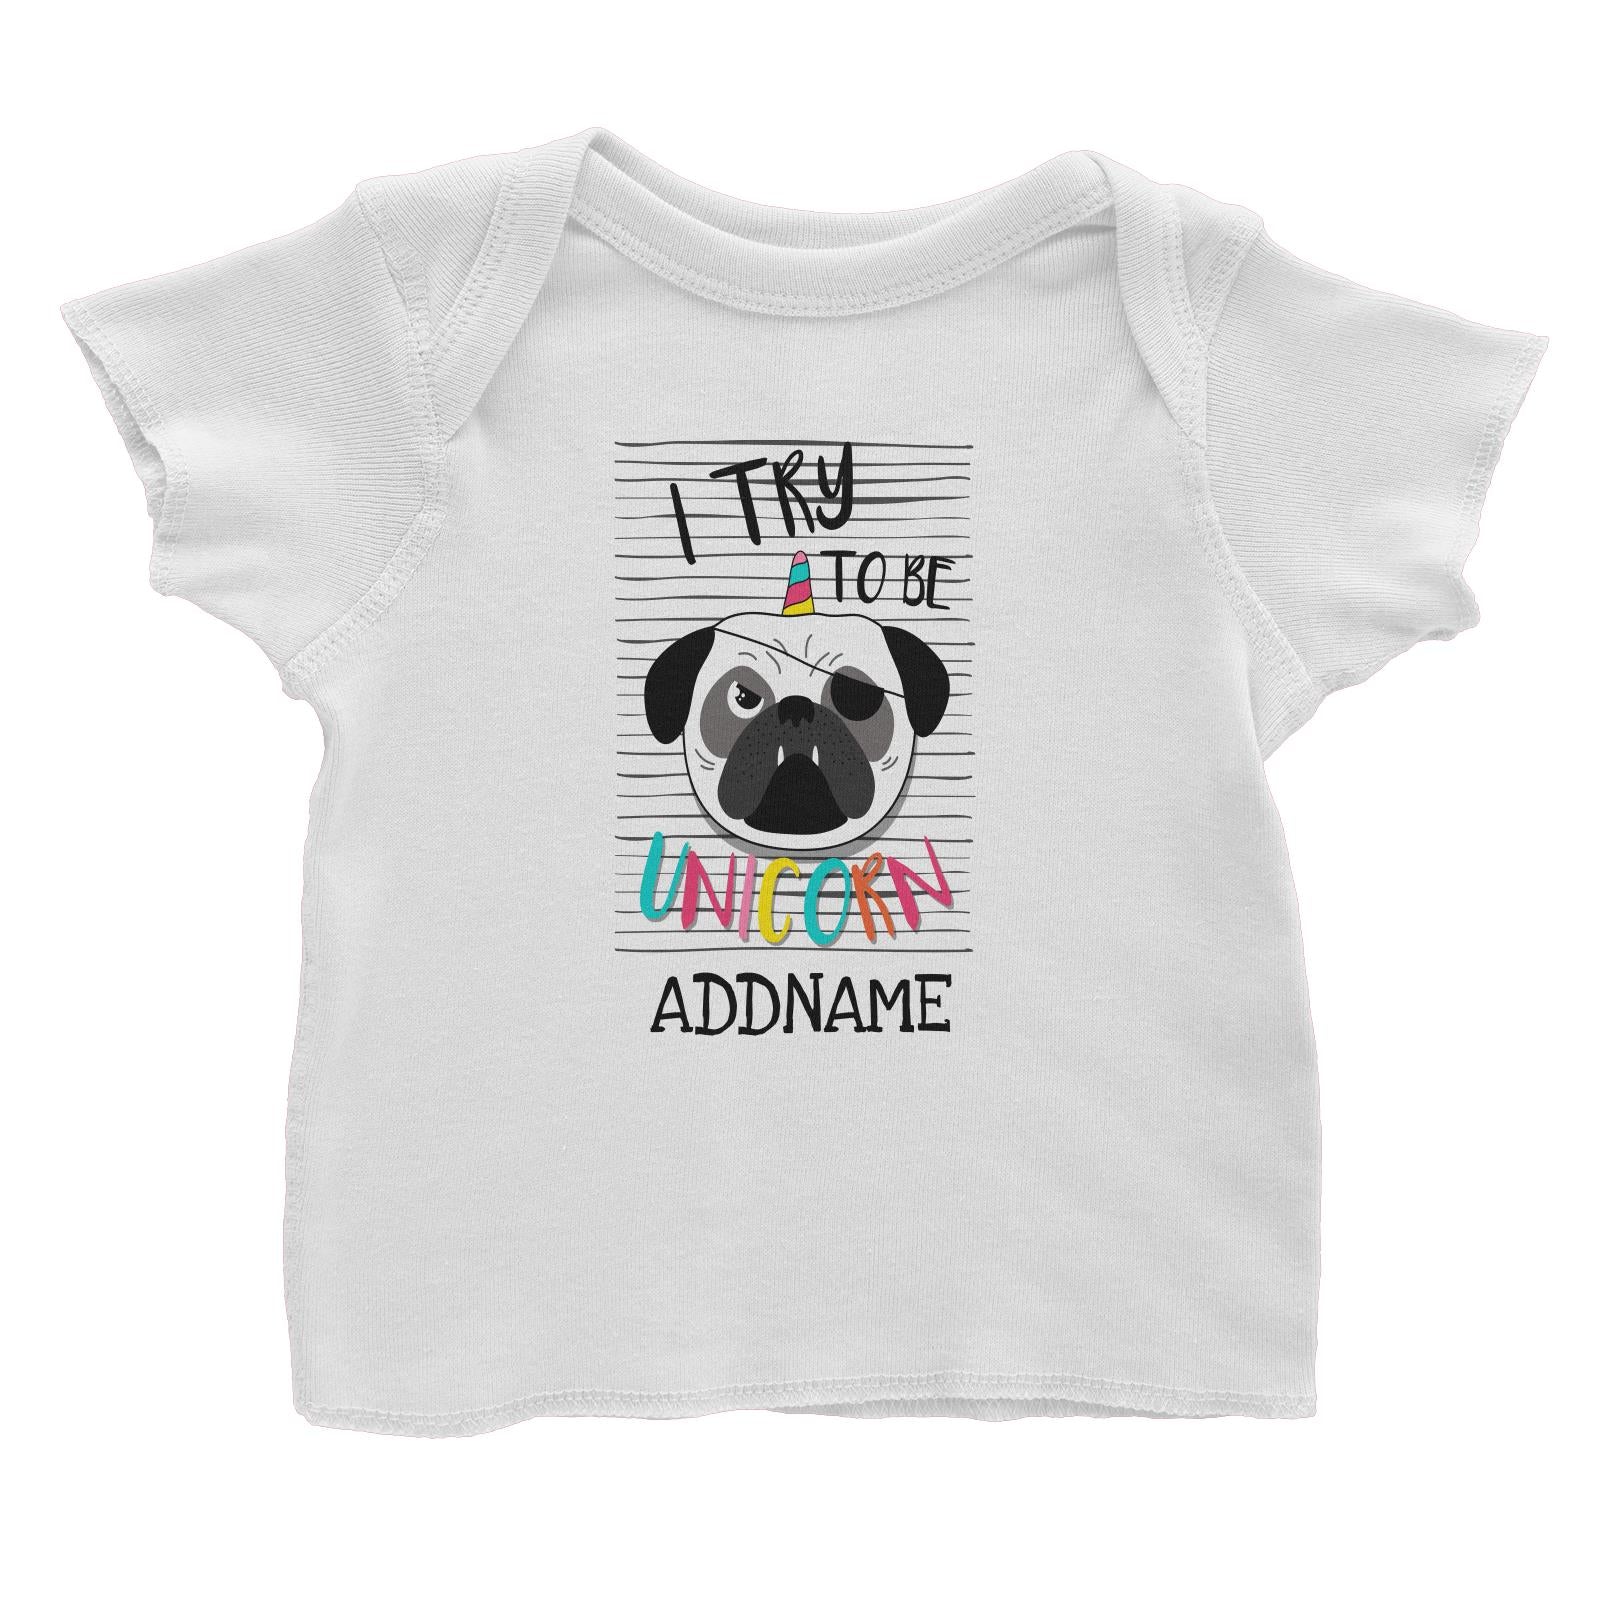 I Try to Be Unicorn Pug Addname White Baby T-Shirt